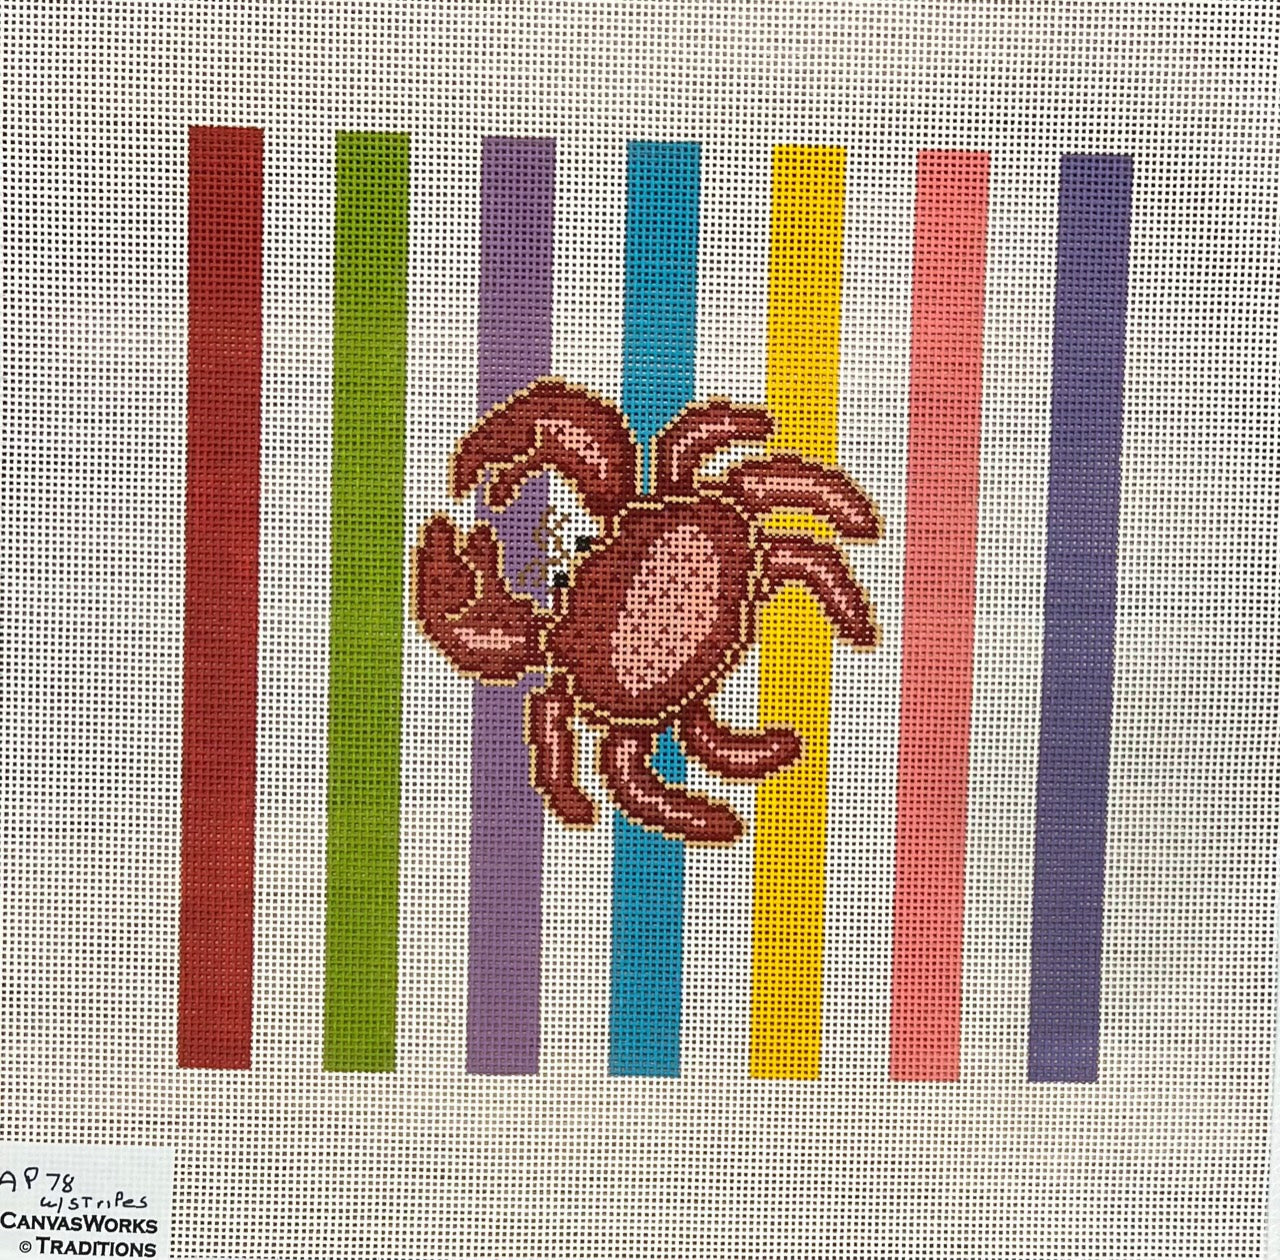 Canvas Works AP 78 Crab with Stripes